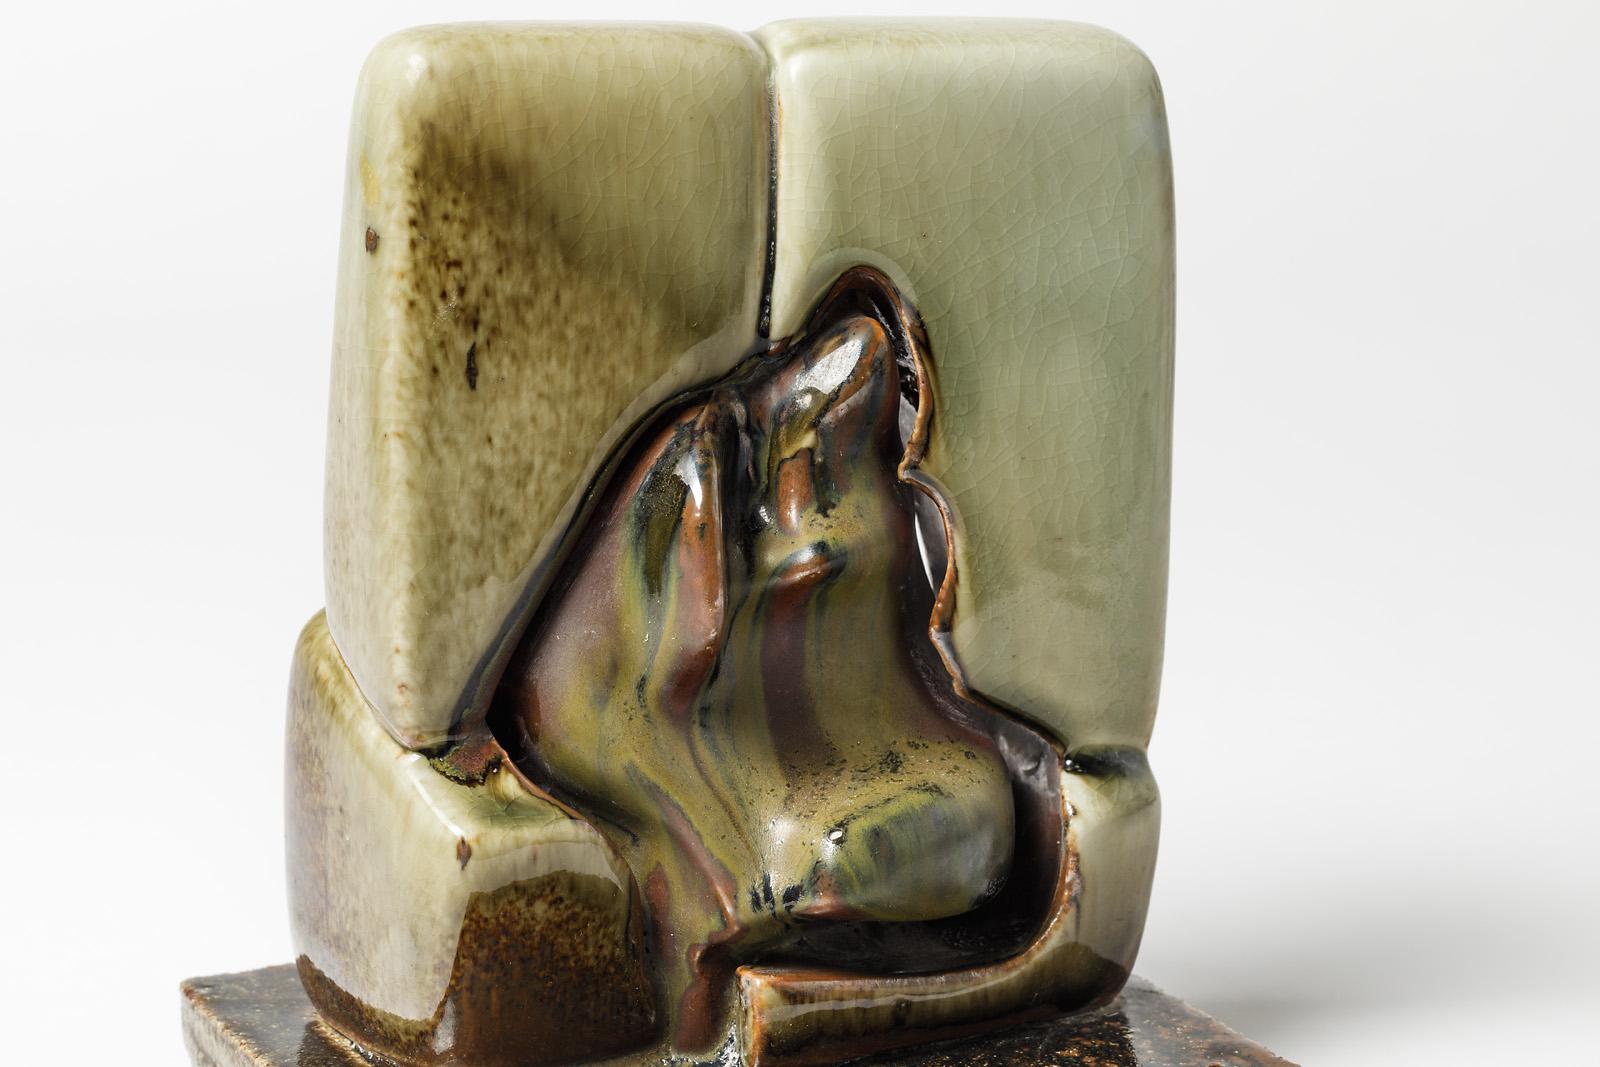 French Ceramic Sculpture with Green- Brown Glazes Decoration by Tim Orr, 1970